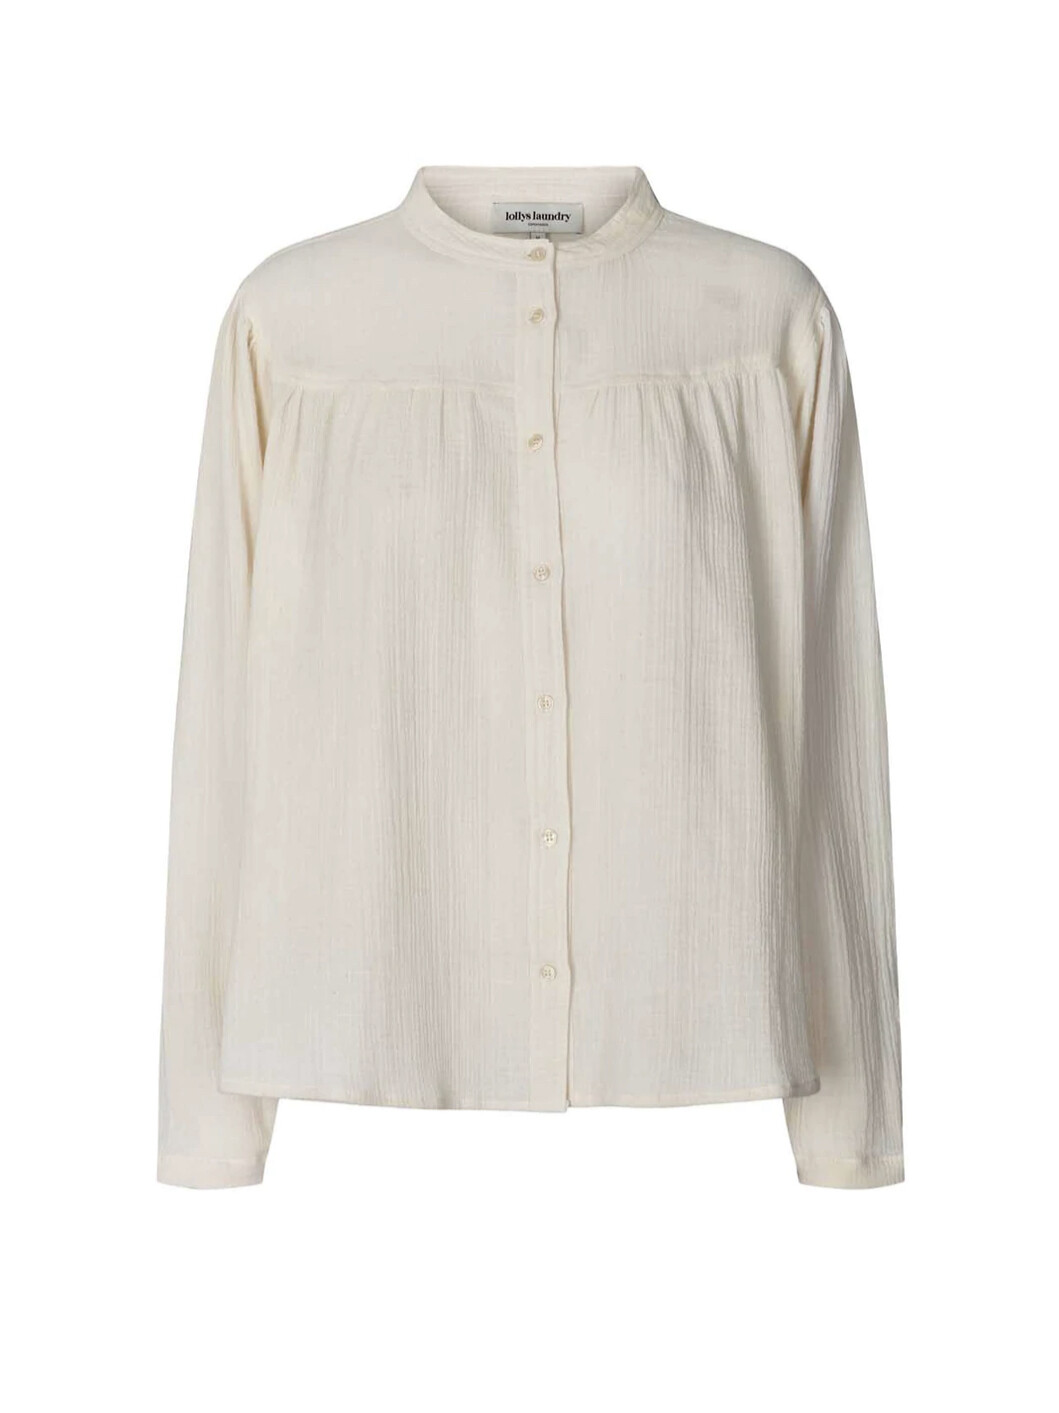 Lollys Laundry Nicky Shirt Creme